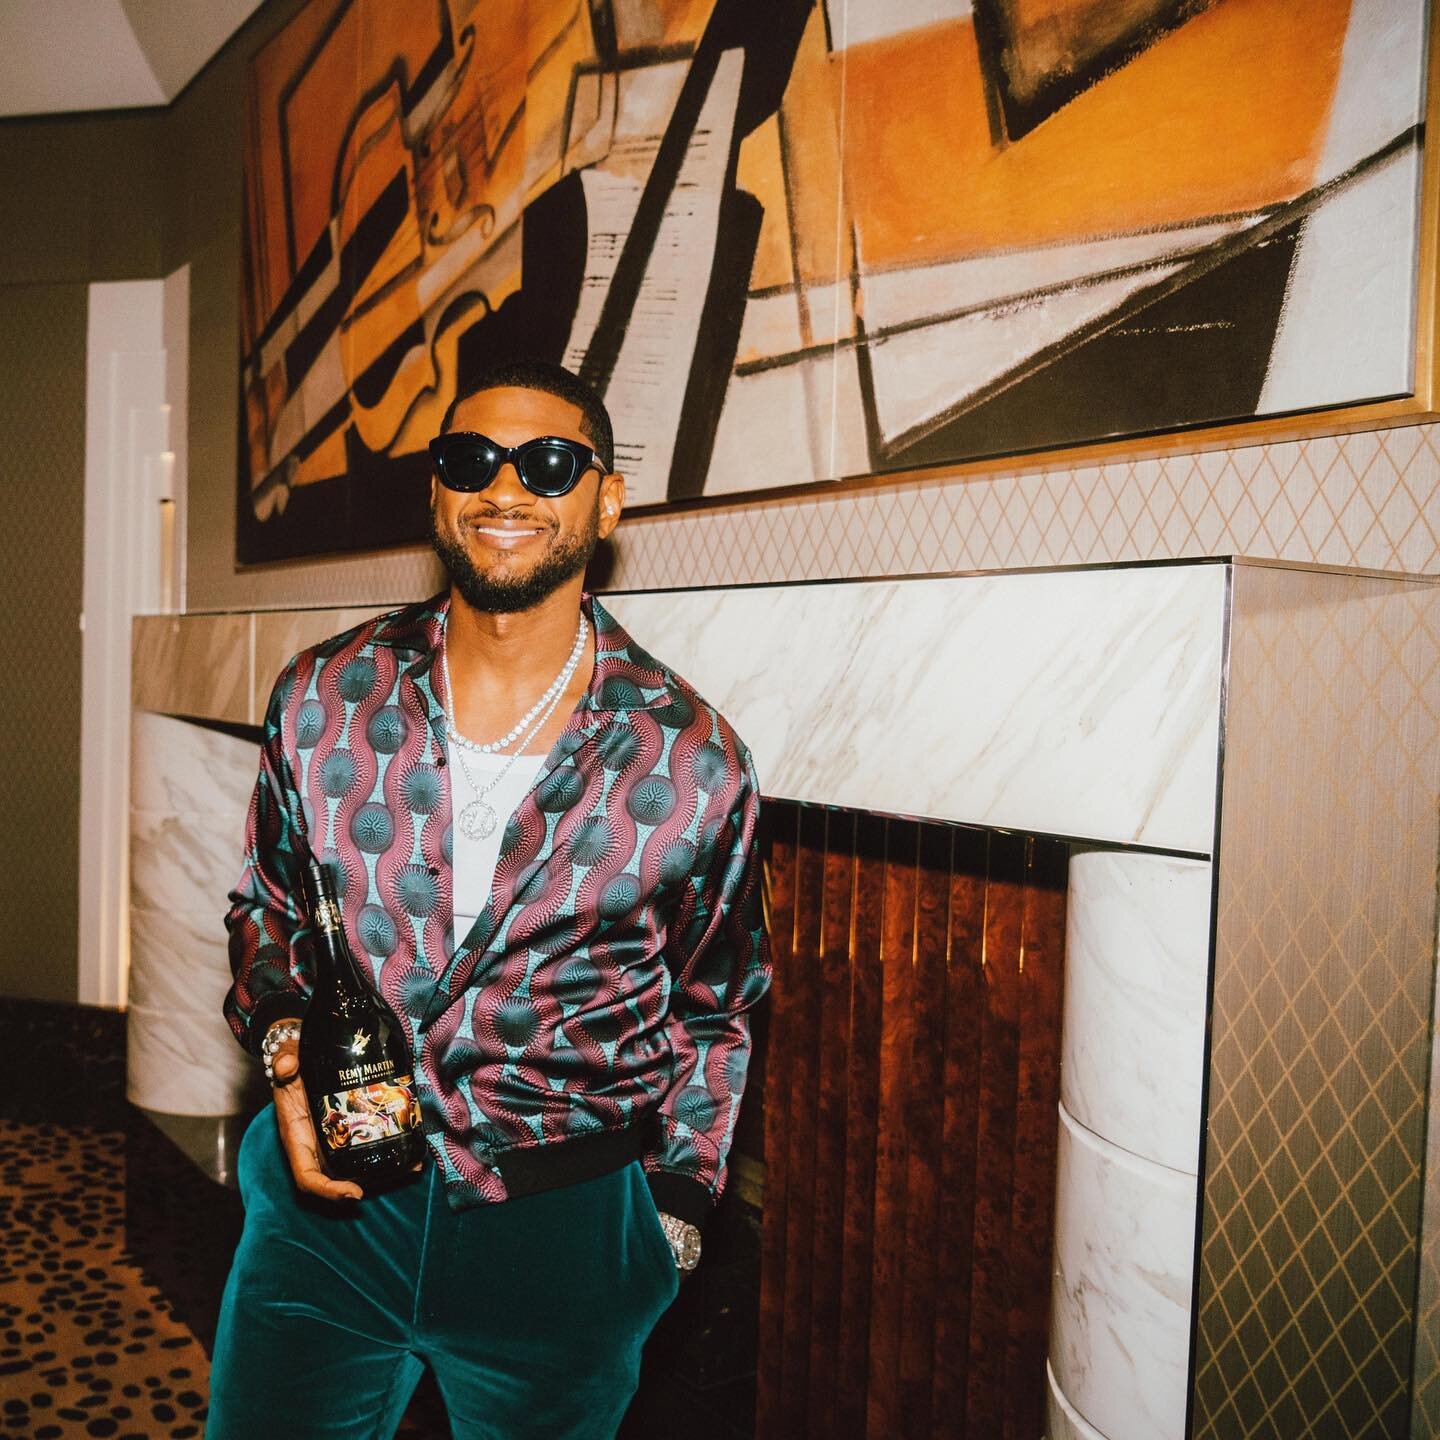 In a real&nbsp;#teamupforexcellence moment, we partnered with @remymartinus to send a team of cultural innovators and tastemakers&mdash;including @terrencej and @realevanross &mdash;to Las Vegas to celebrate&nbsp;R&eacute;my Martin's #tasteofpassion 